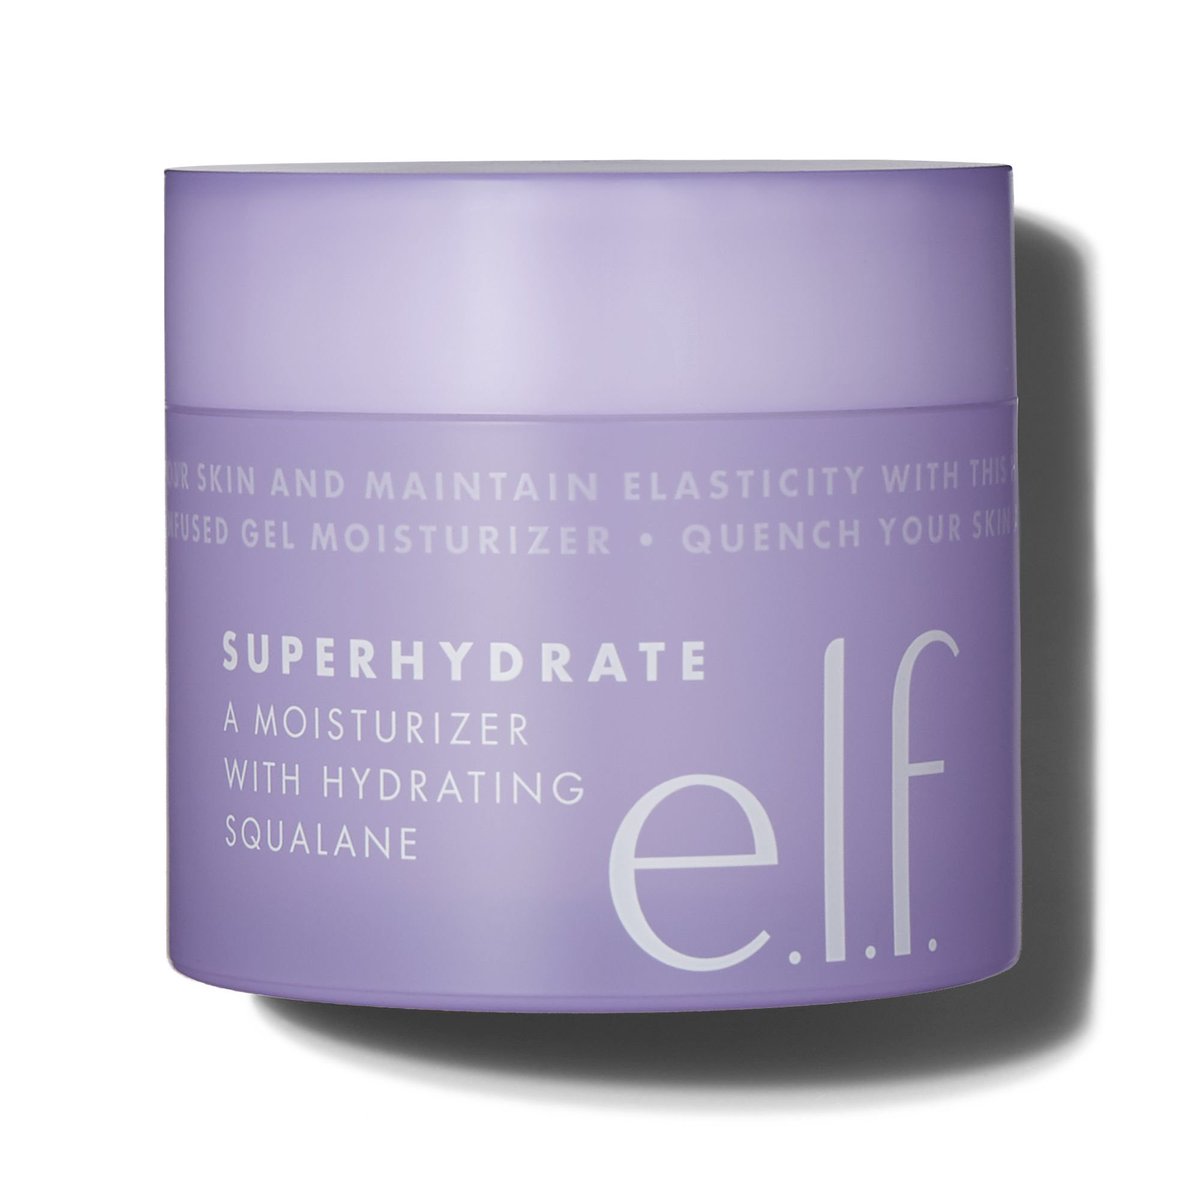 Moisturizers: ELF, Cerave, La Roche Posay all make great drugstore moisturizers. all rich in ceramides, niacinamide, hyaluronic acids and cholesterol. all great ingredients to protect and nourish your skin barrier